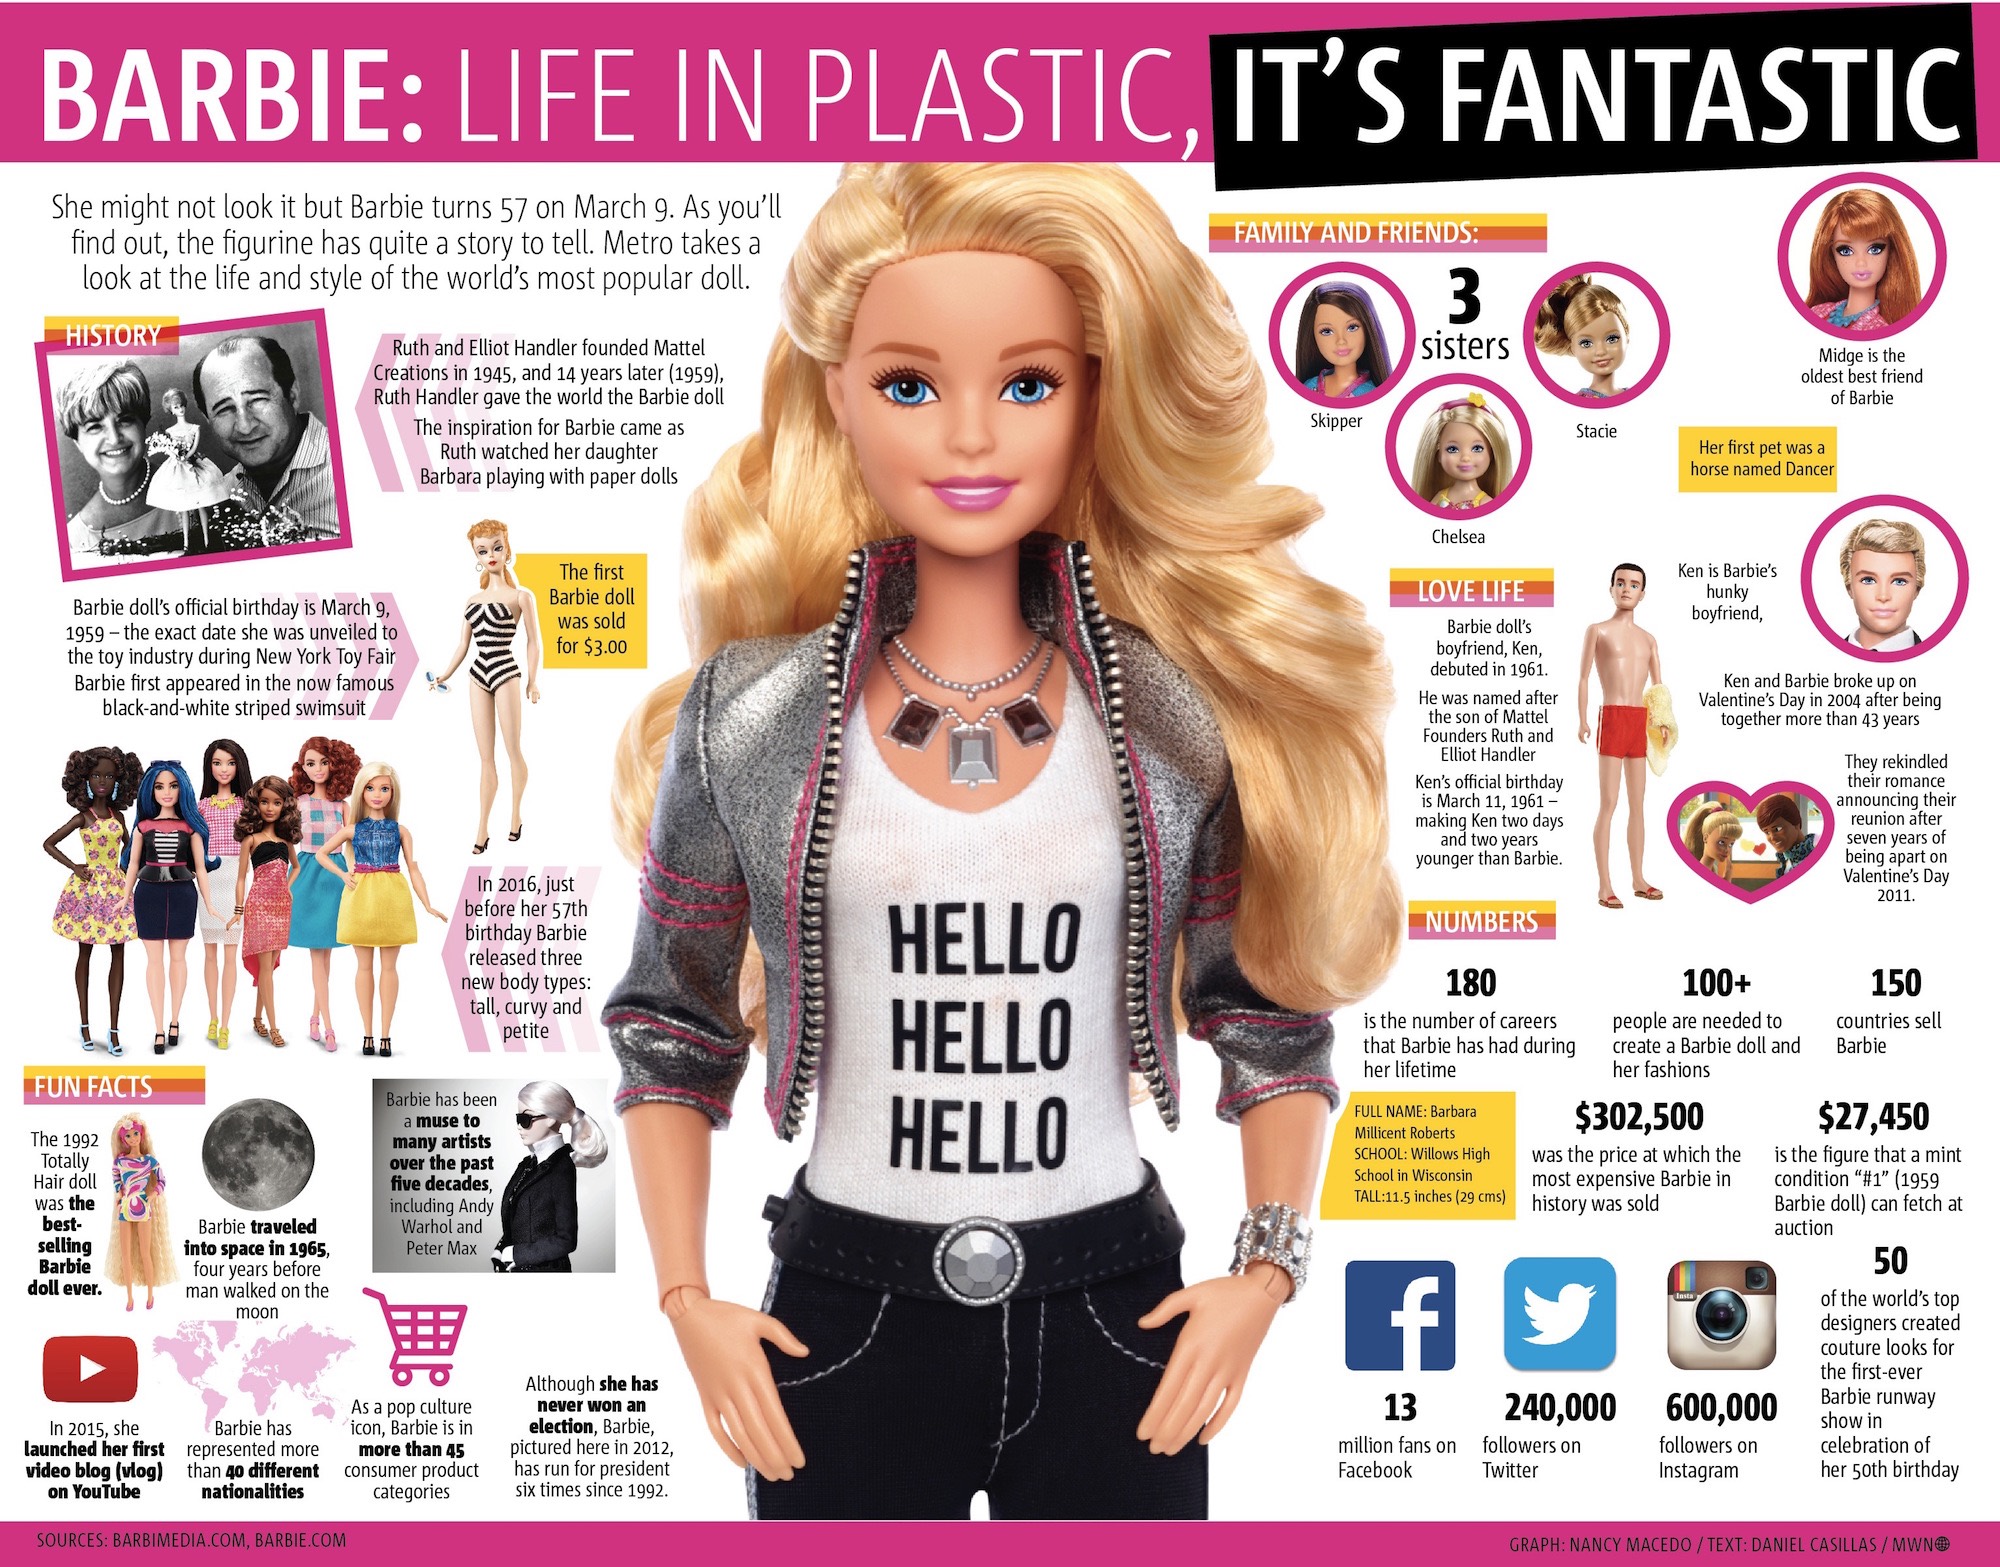 Barbie Facts